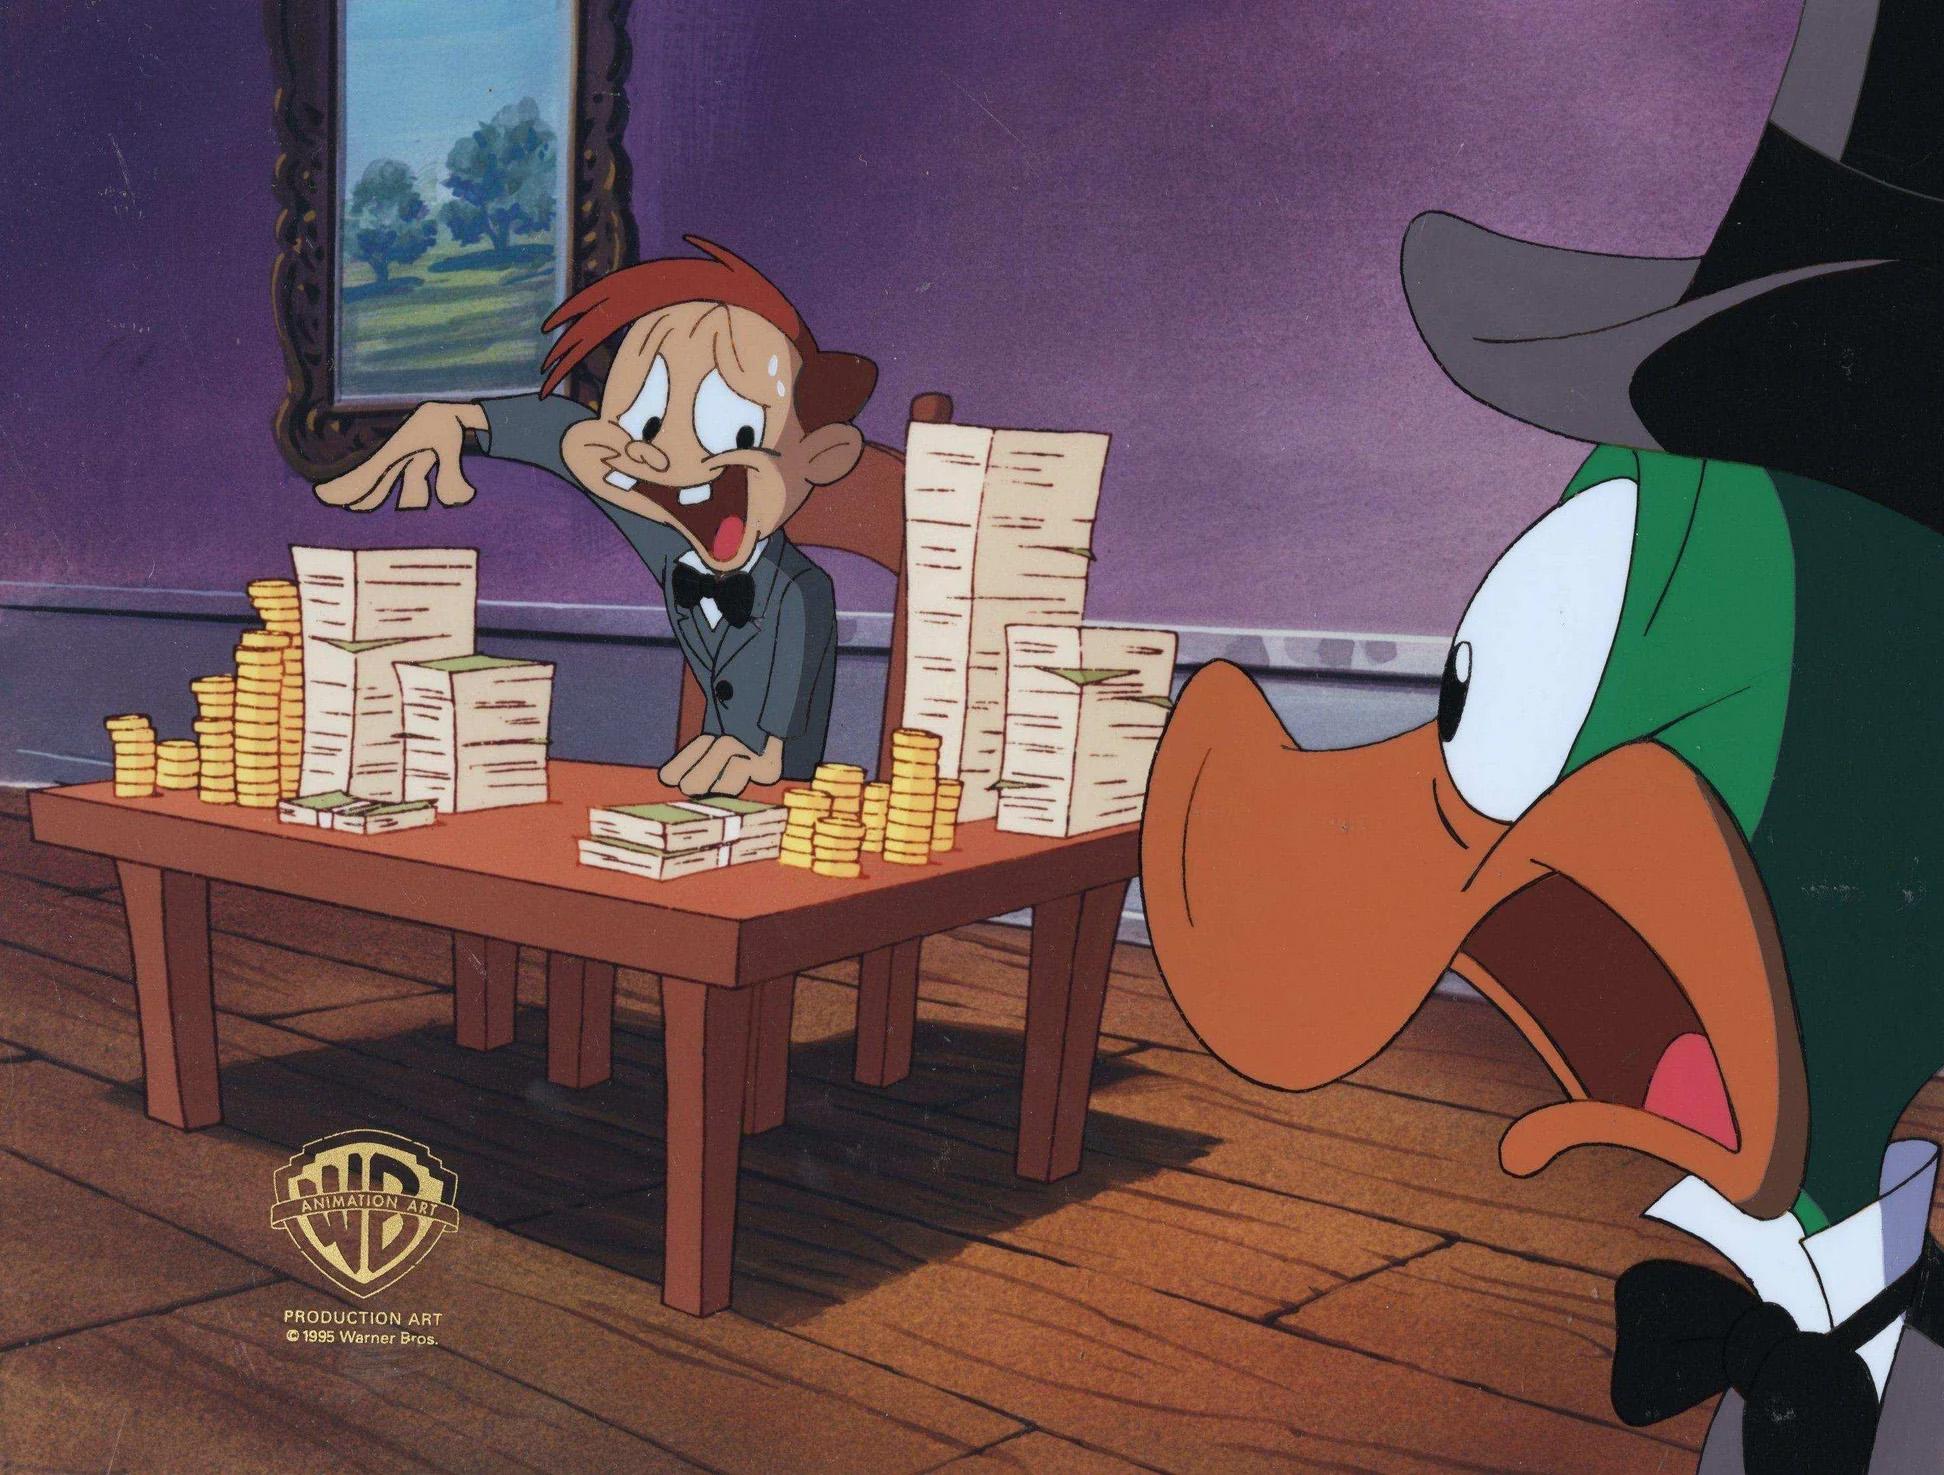 Tiny Toons Original Production Cel: Plucky Duck and Montana Max - Art by Warner Bros. Studio Artists